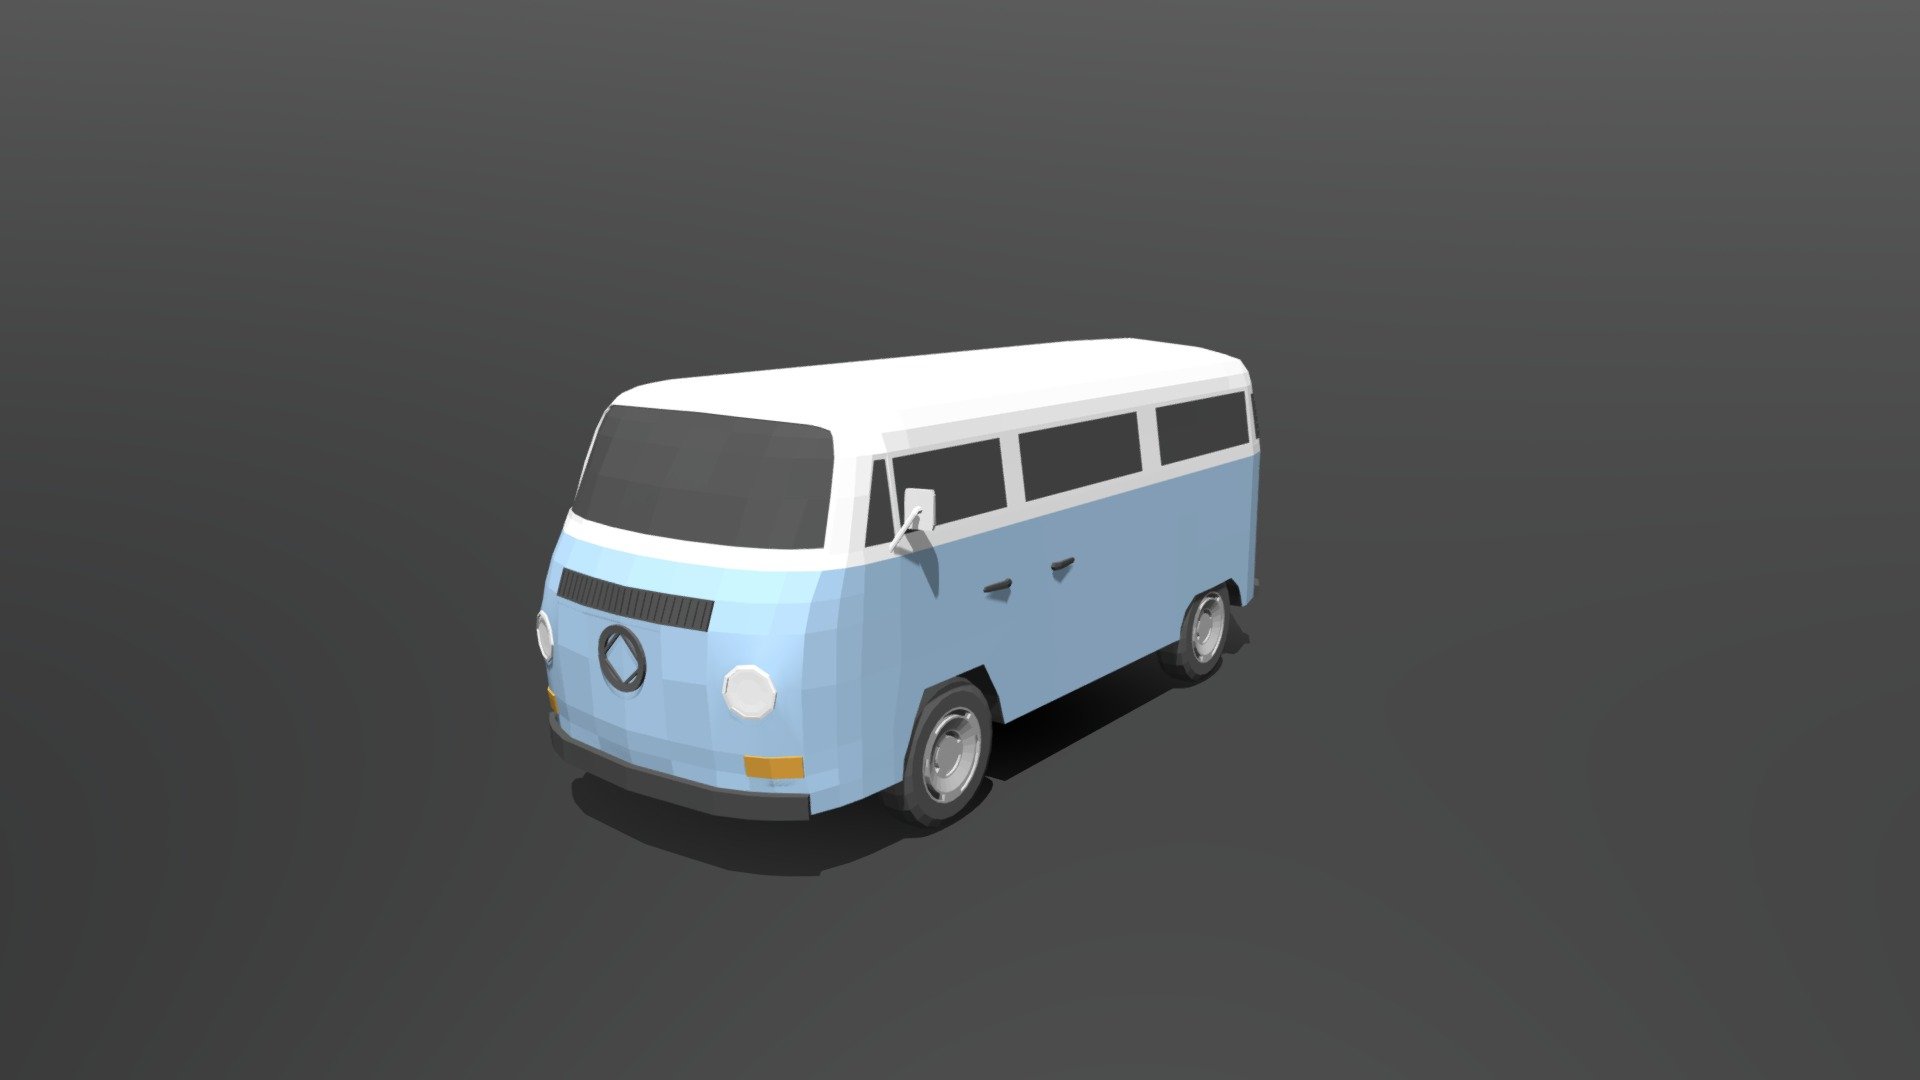 This is a low poly 3d model of a retro van. The low poly van was modeled and prepared for low-poly style renderings, background, general CG visualization presented as a mesh with quads only.

Verts : 4.480 Faces: 4.450

The model have simple materials with diffuse colors.

No ring, maps and no UVW mapping is available.

The original file was created in blender. You will receive a 3DS, OBJ, FBX, blend, DAE, Stl.

All preview images were rendered with Blender Cycles. Product is ready to render out-of-the-box. Please note that the lights, cameras, and background is only included in the .blend file. The model is clean and alone in the other provided files, centred at origin and has real-world scale 3d model